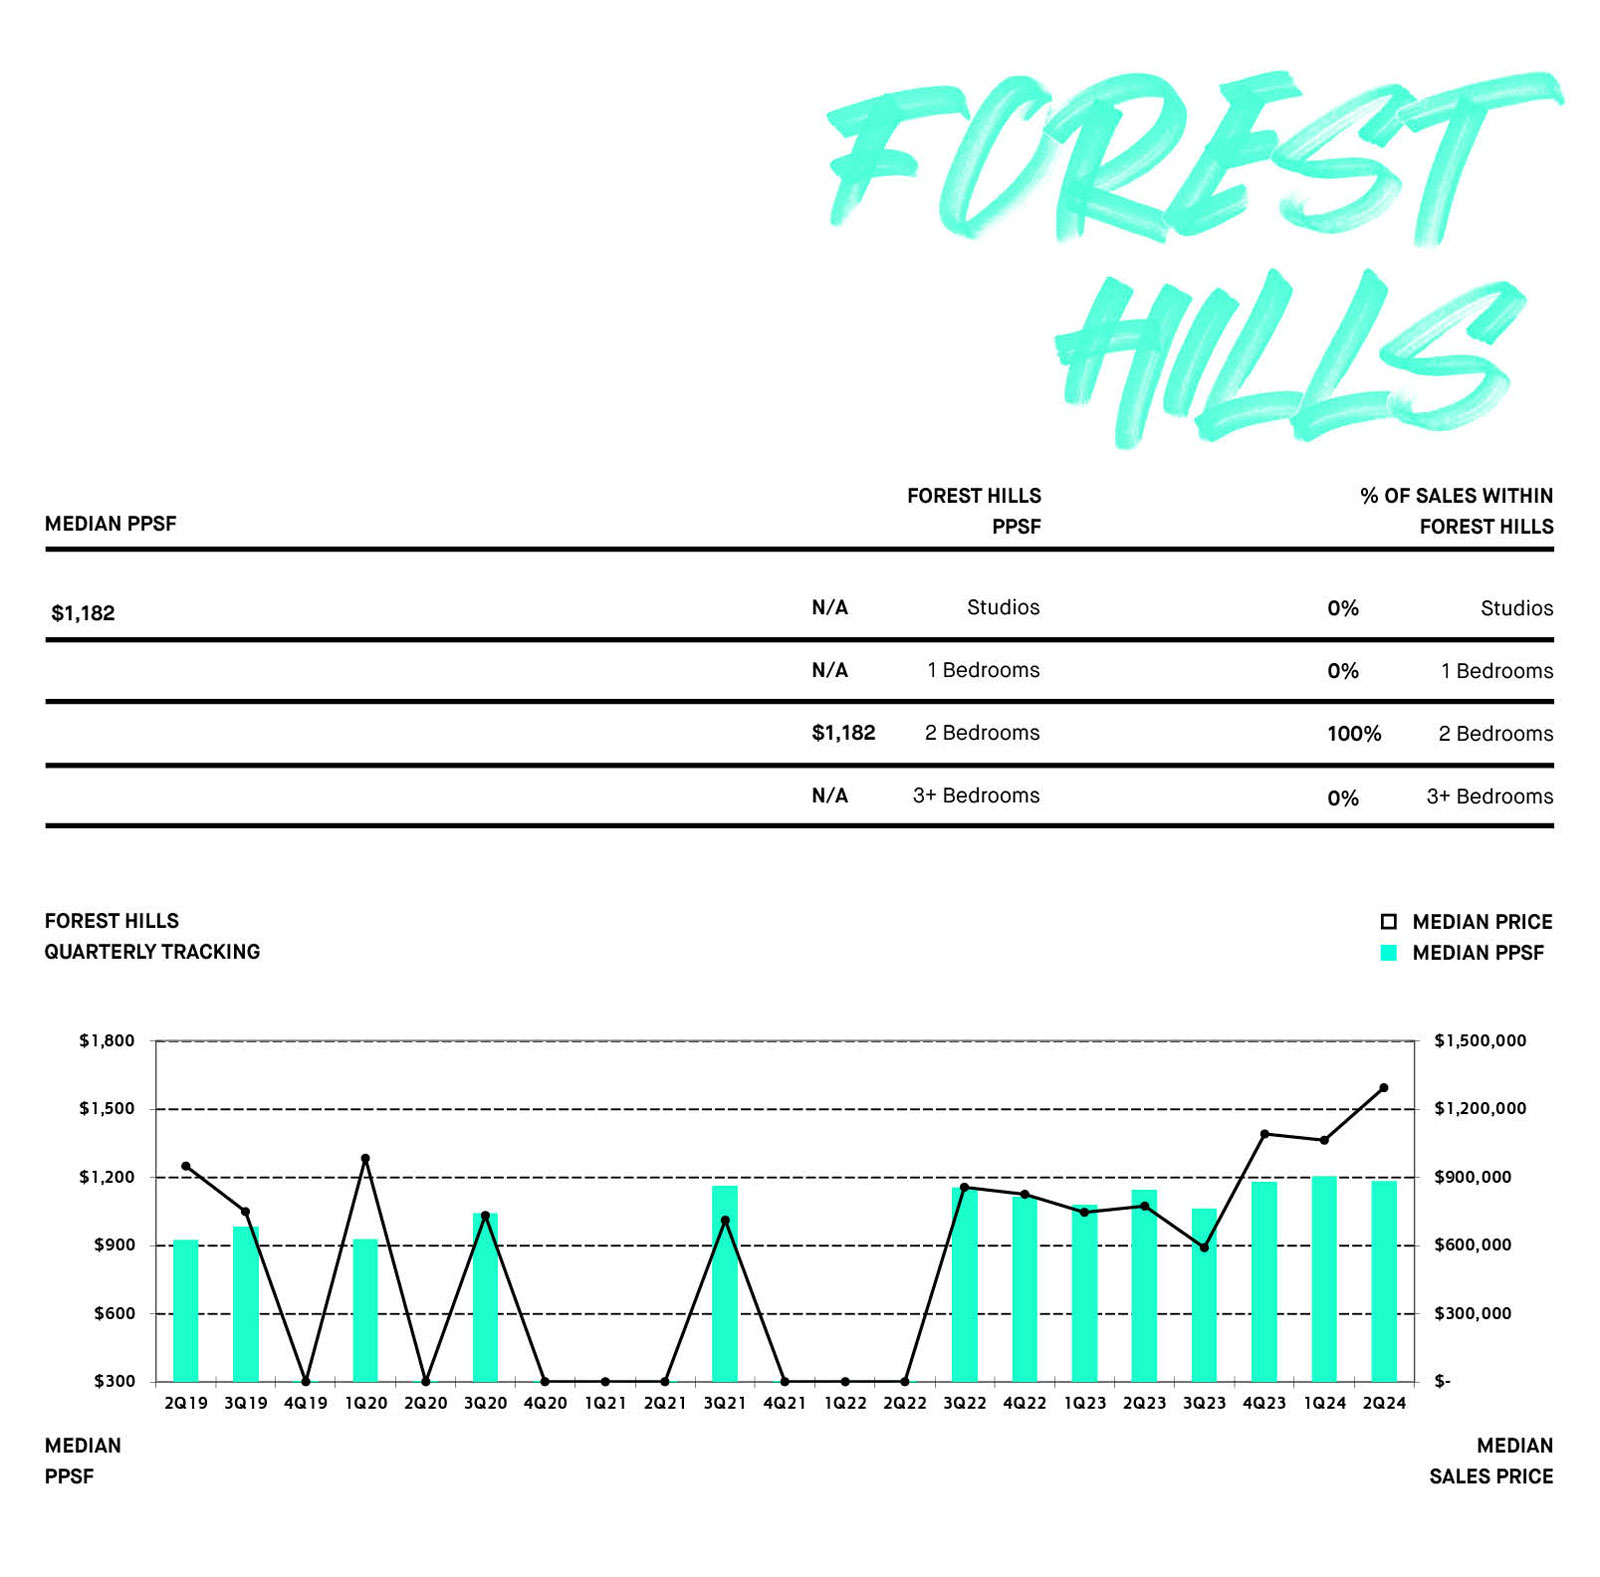 FOREST HILLS